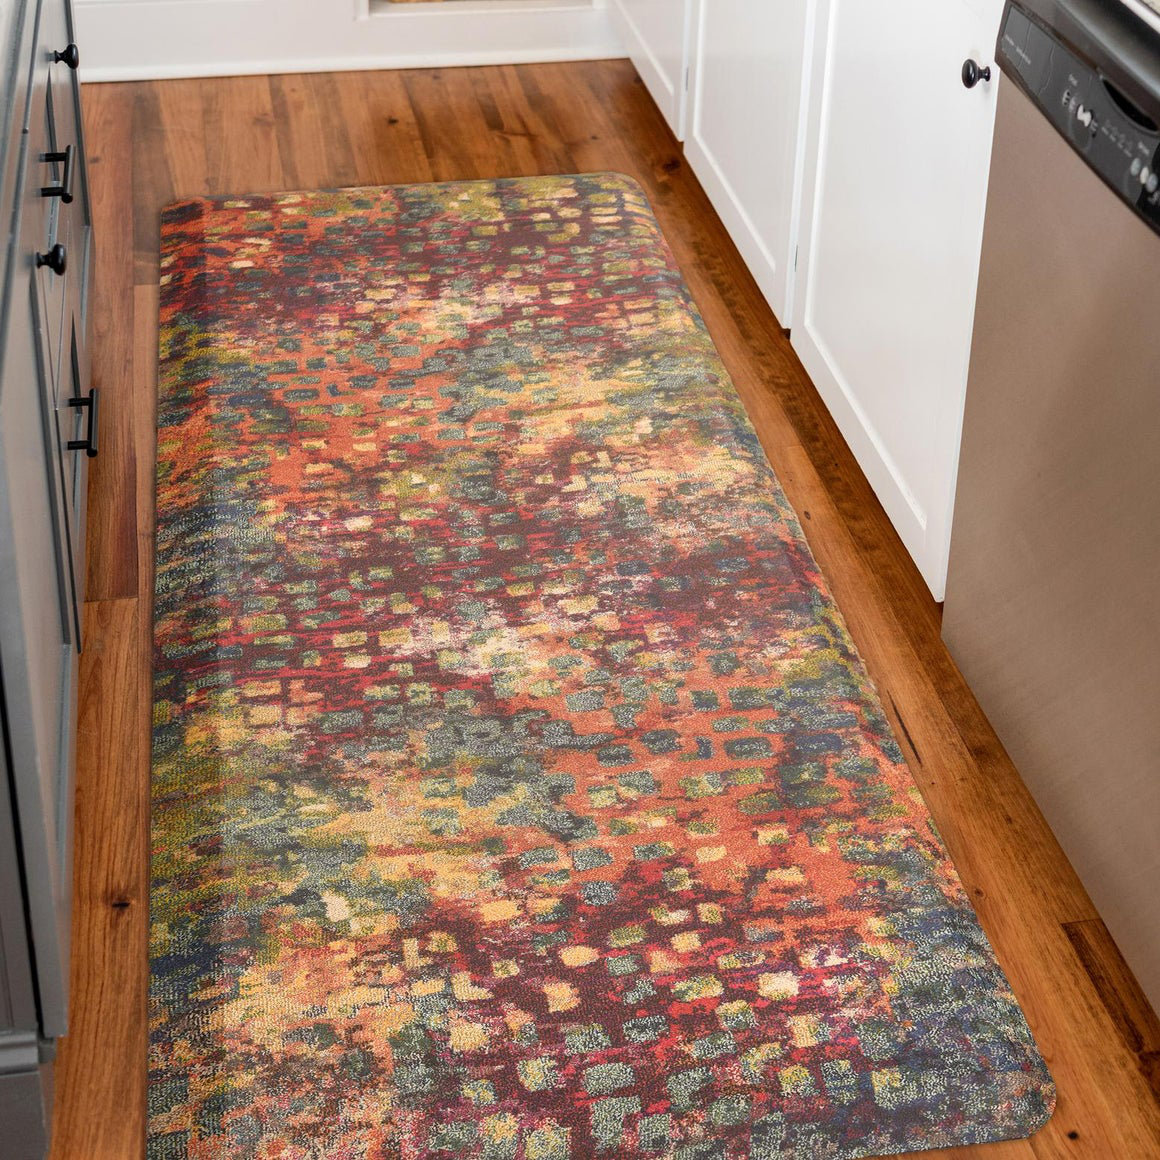 Dodoing Non-Slip Rug Pad Carpet Padding Non Skid Rug Pad for Any Hard Surface Floors, Keep Your Rugs Safe and in Place, Size: 2' x 3', Multicolor